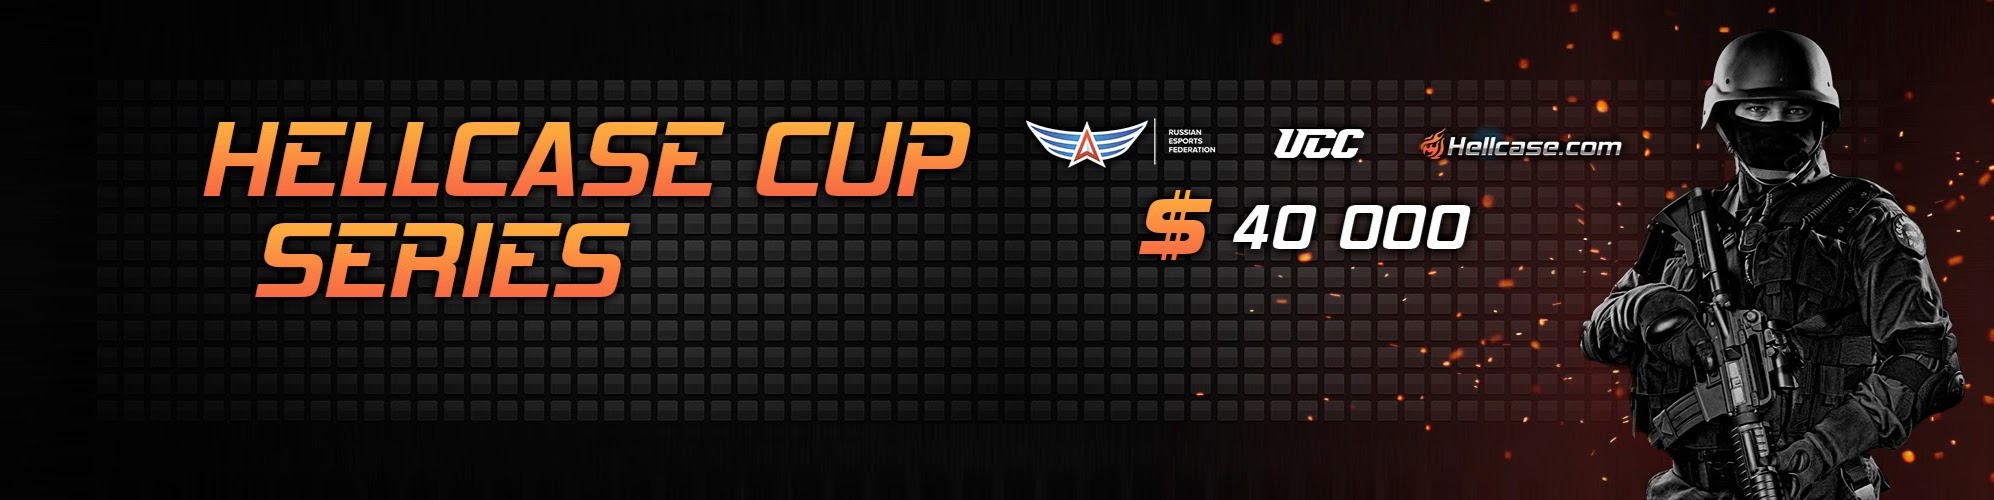 Hellcase Cup